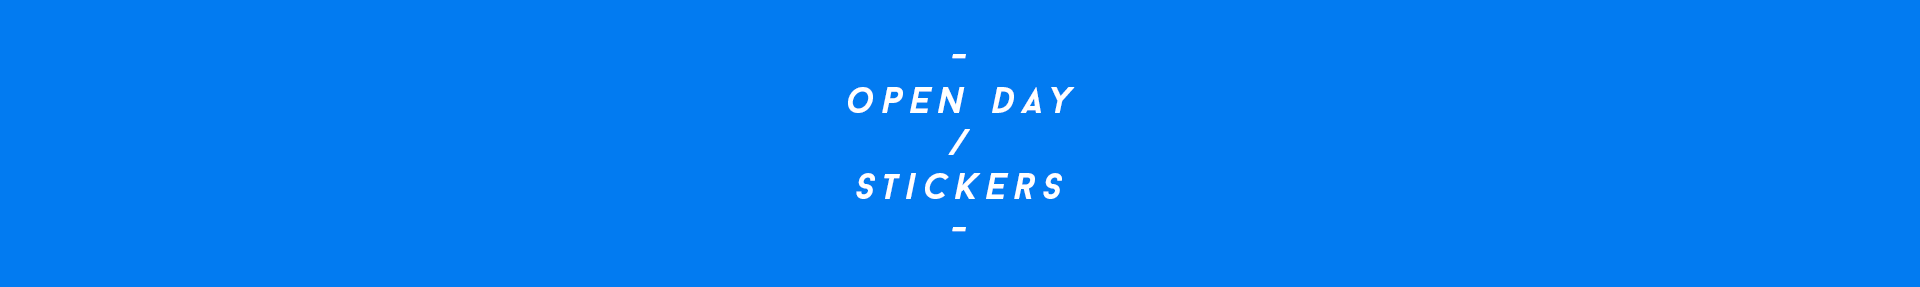 001_md_stickers